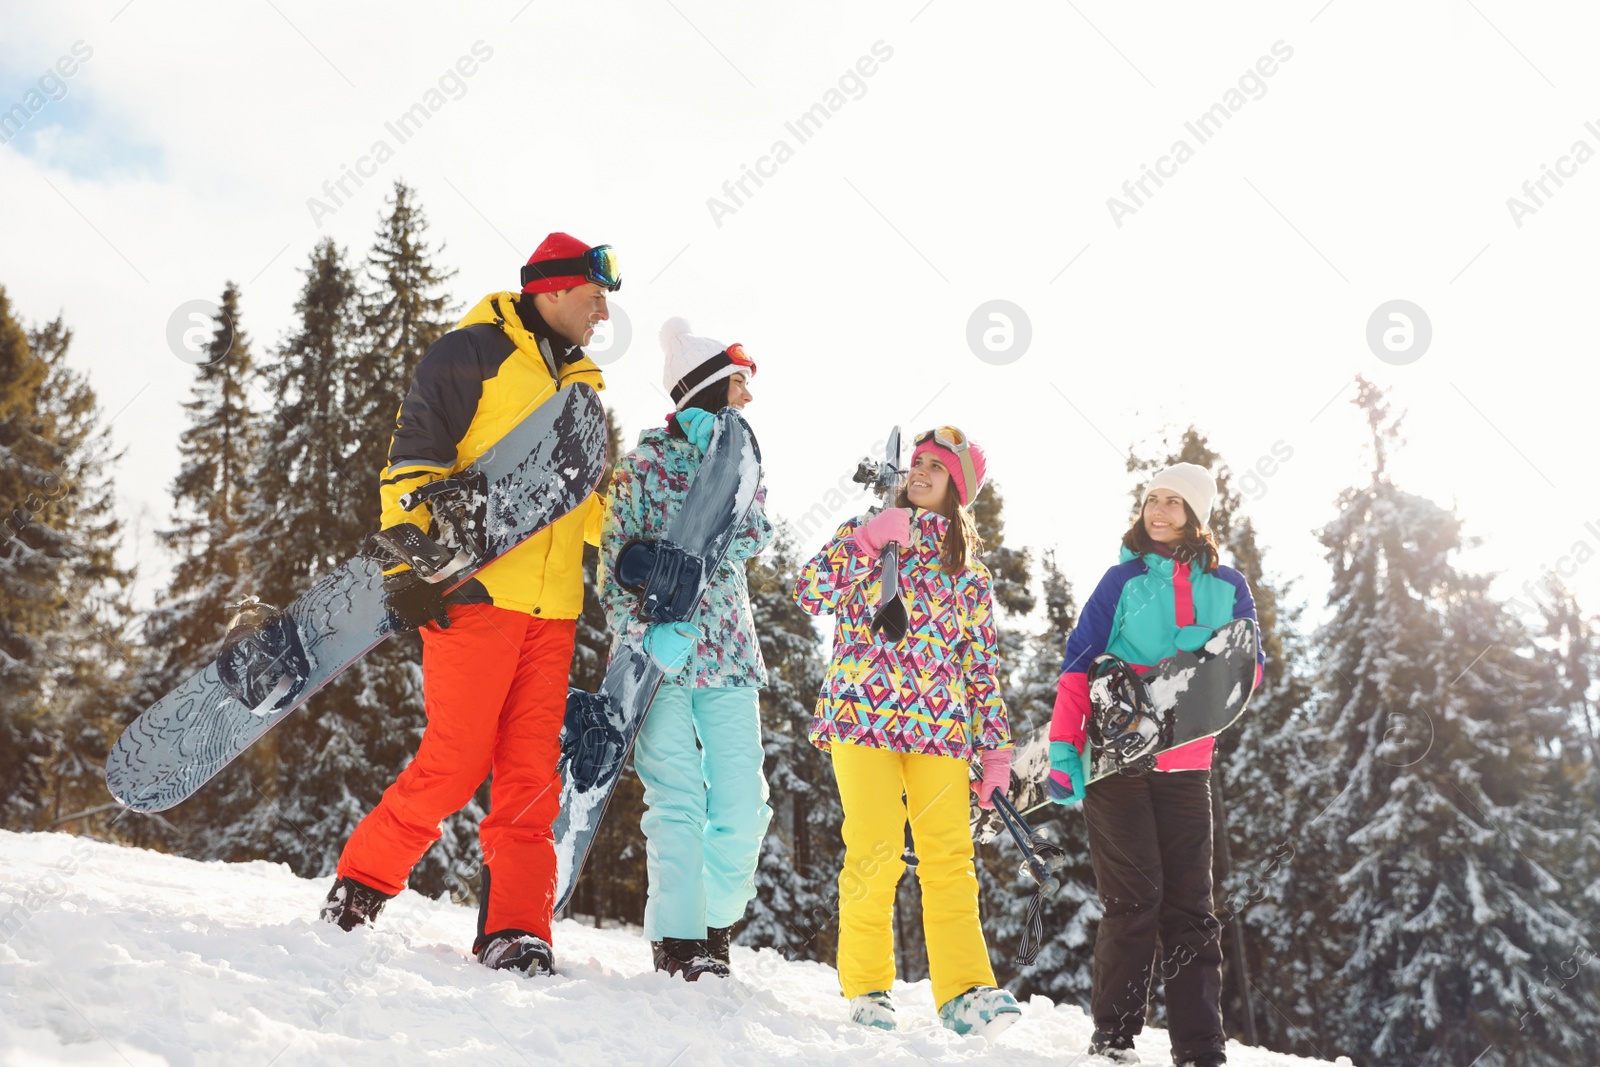 Photo of Group of friends with equipment on snowy slope. Winter vacation